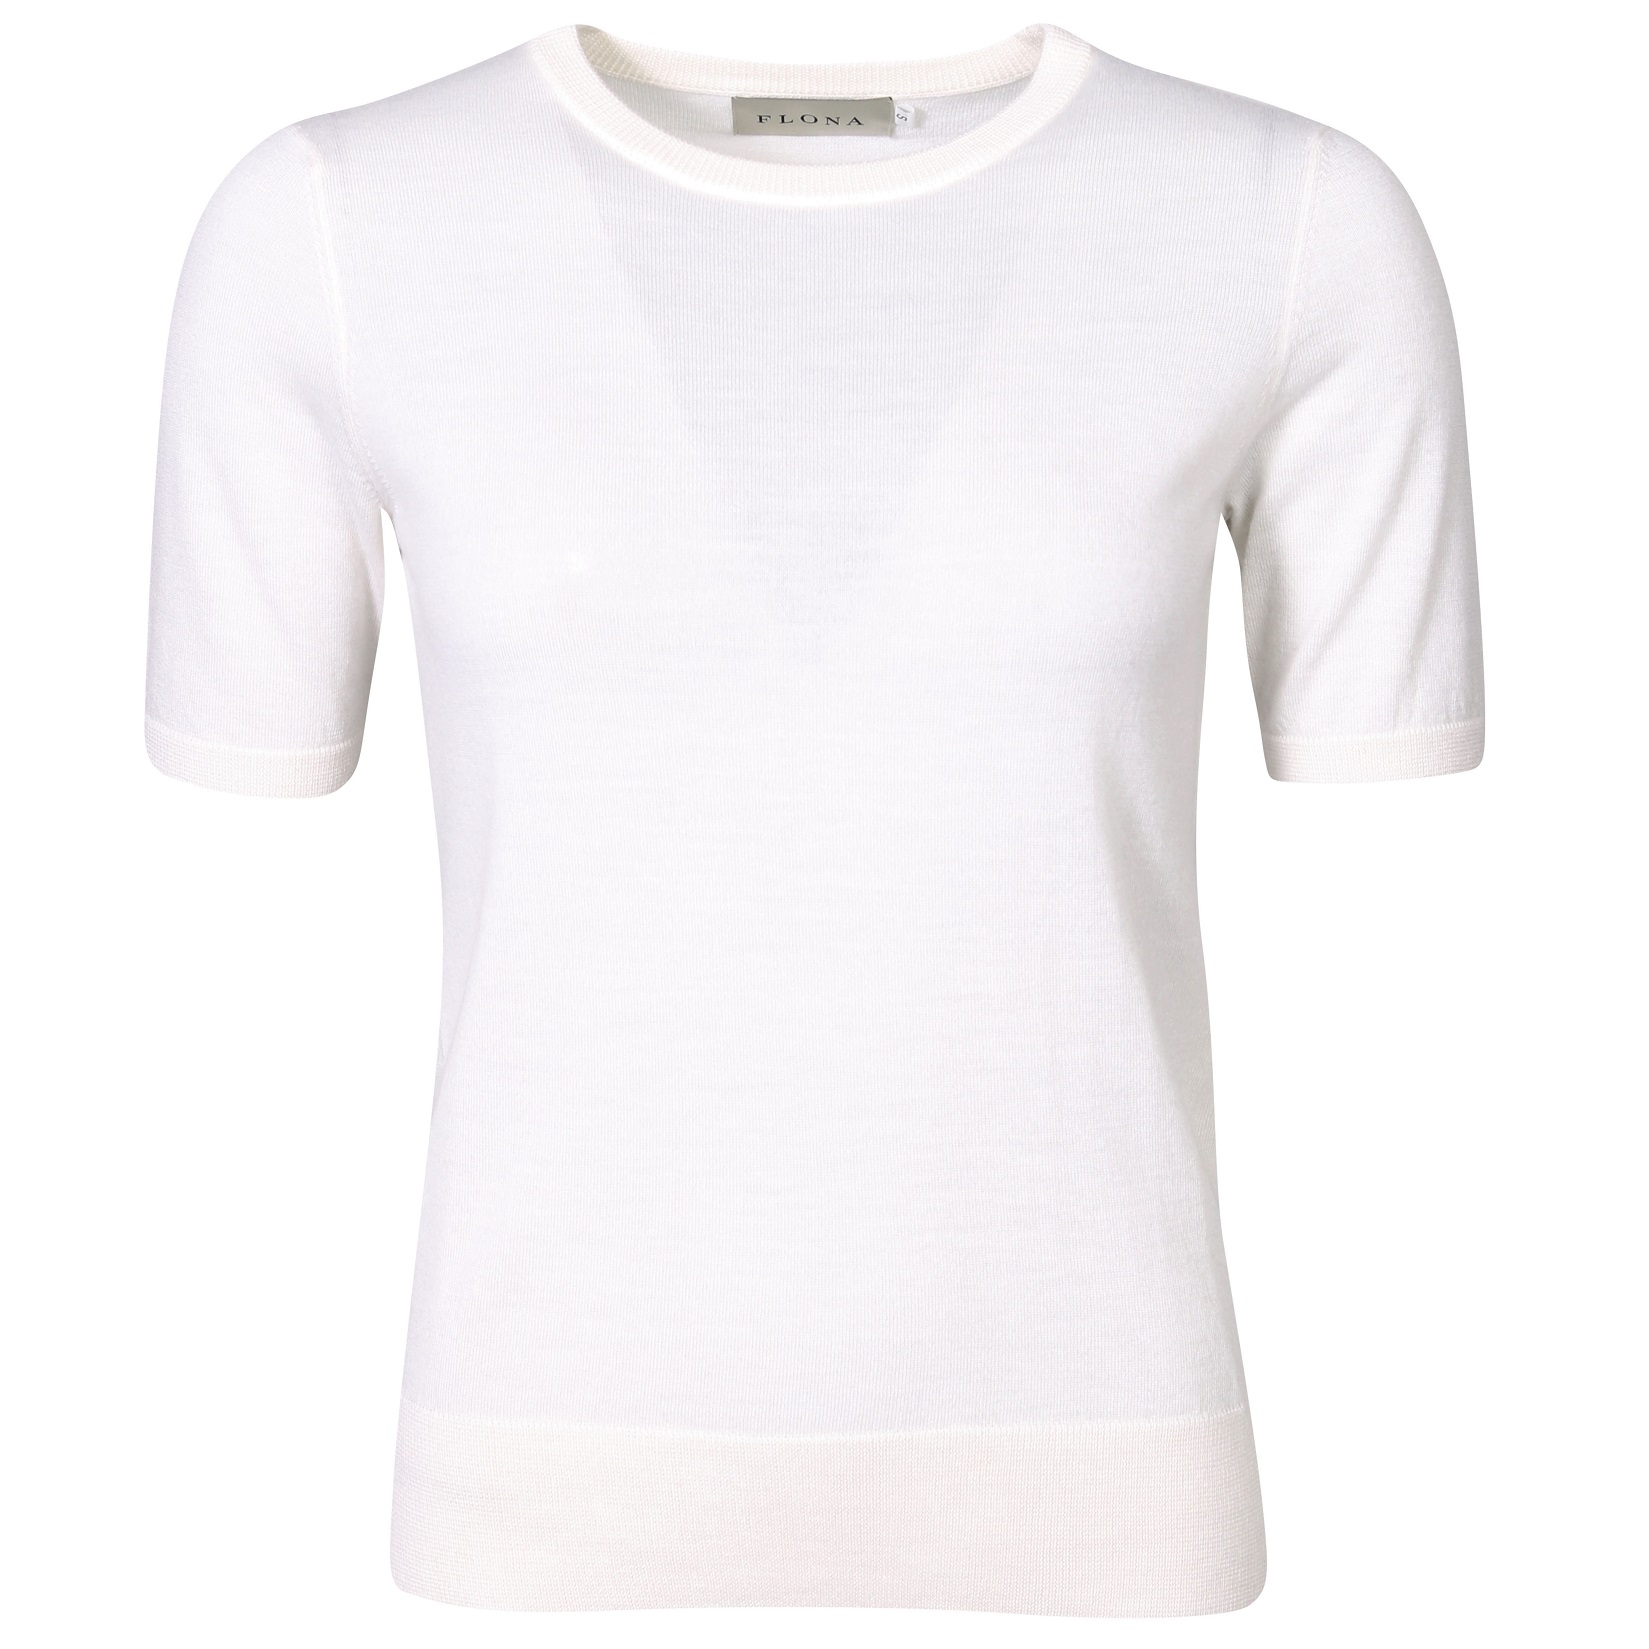 FLONA Cashmere T-Shirt in Off White XL